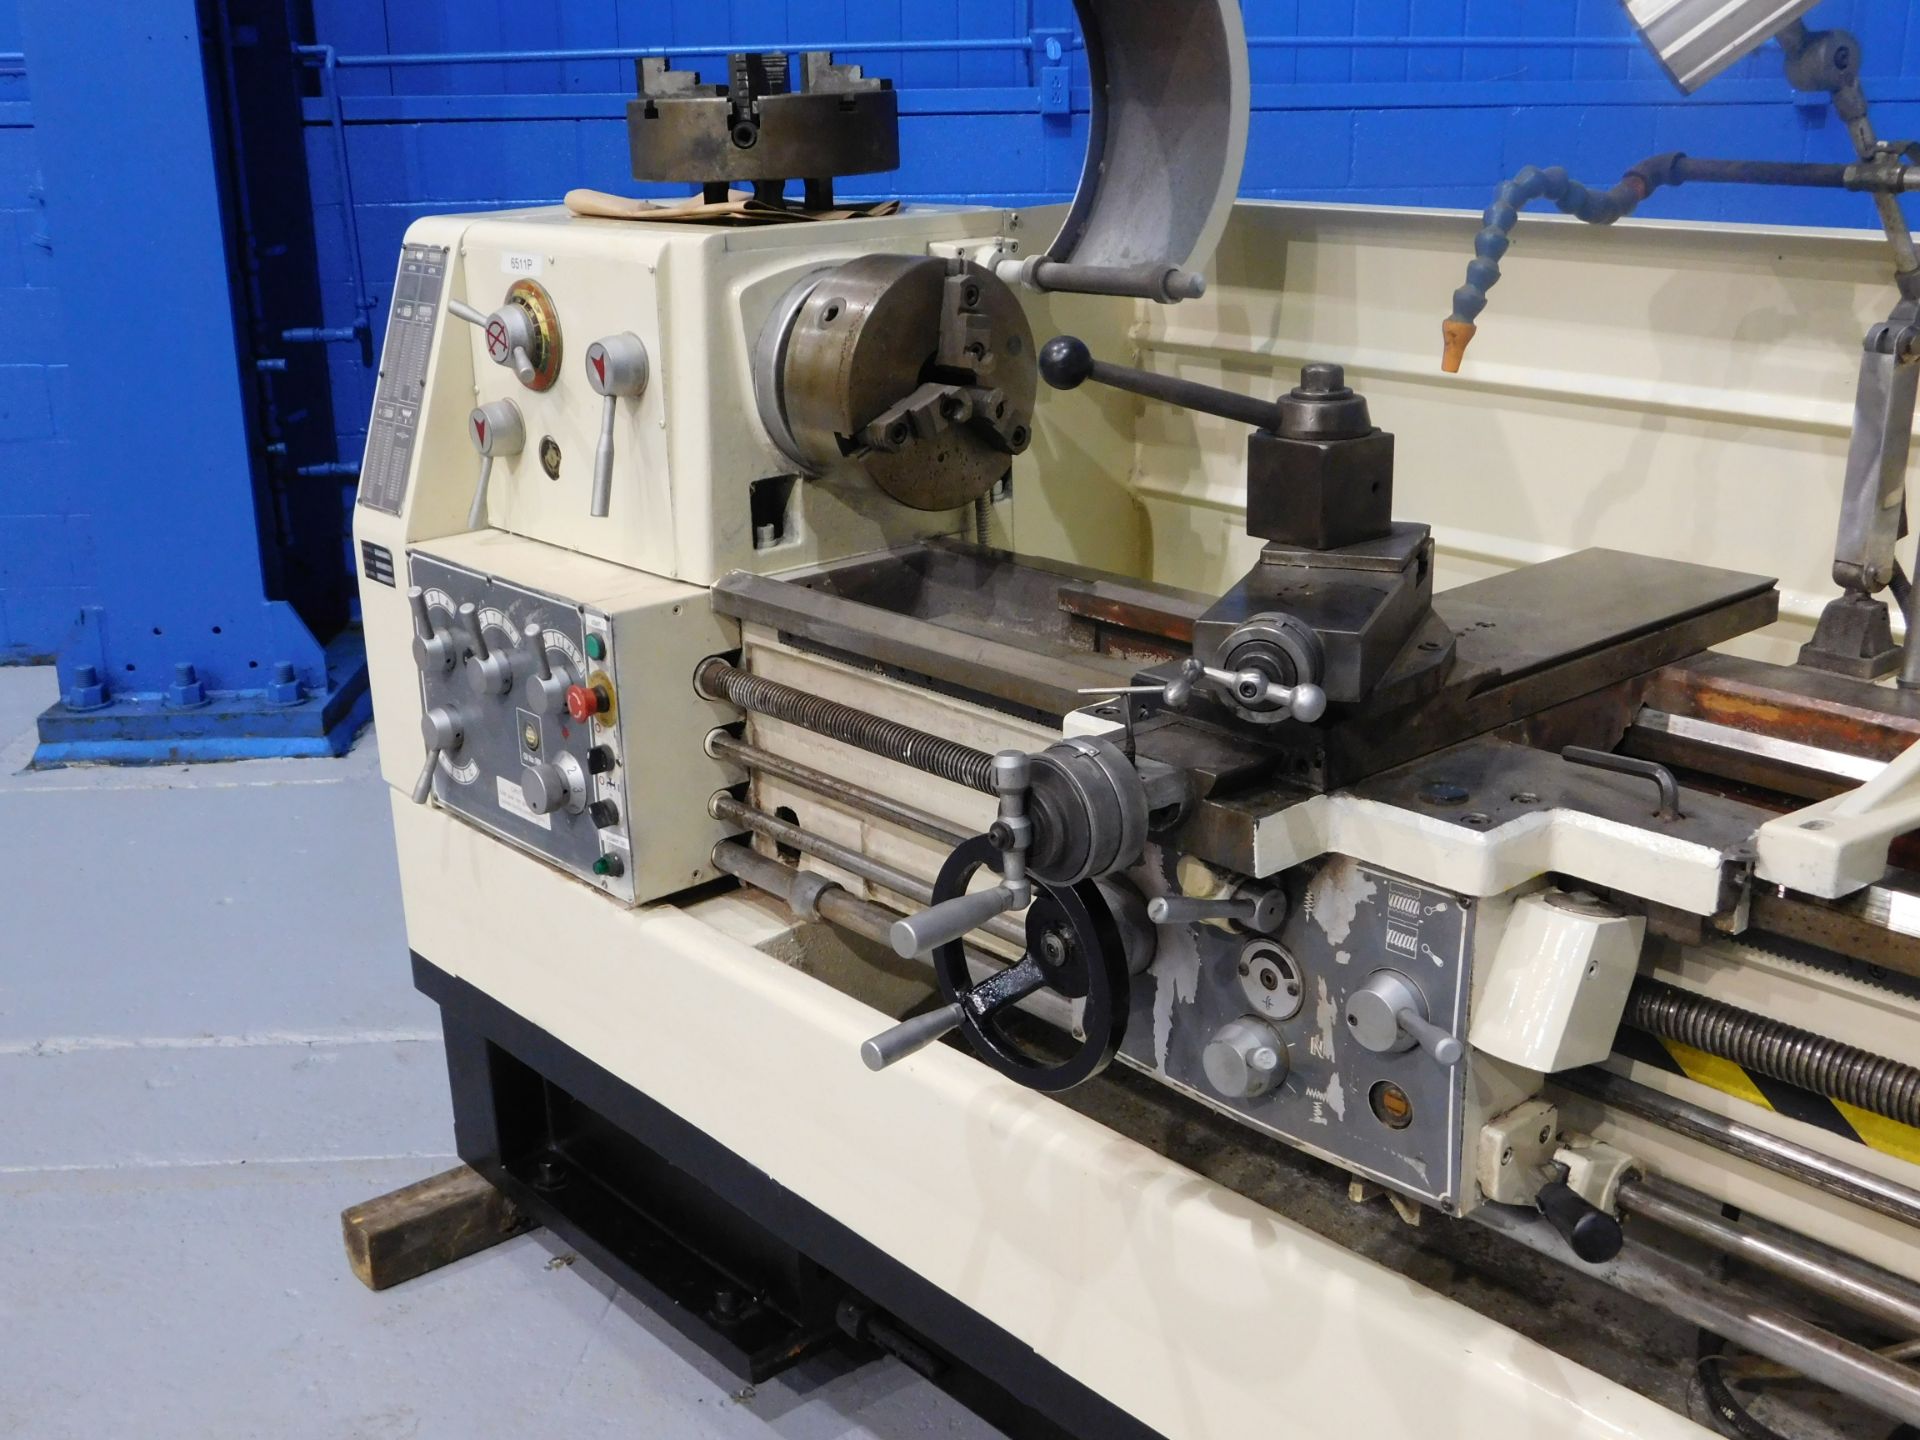 2007 Vectrax Engine Lathe, 16" x 60", Mdl: DY-410-1500, S/N: AY-A6-068 - Painesville, OH - 6511P - Image 6 of 8